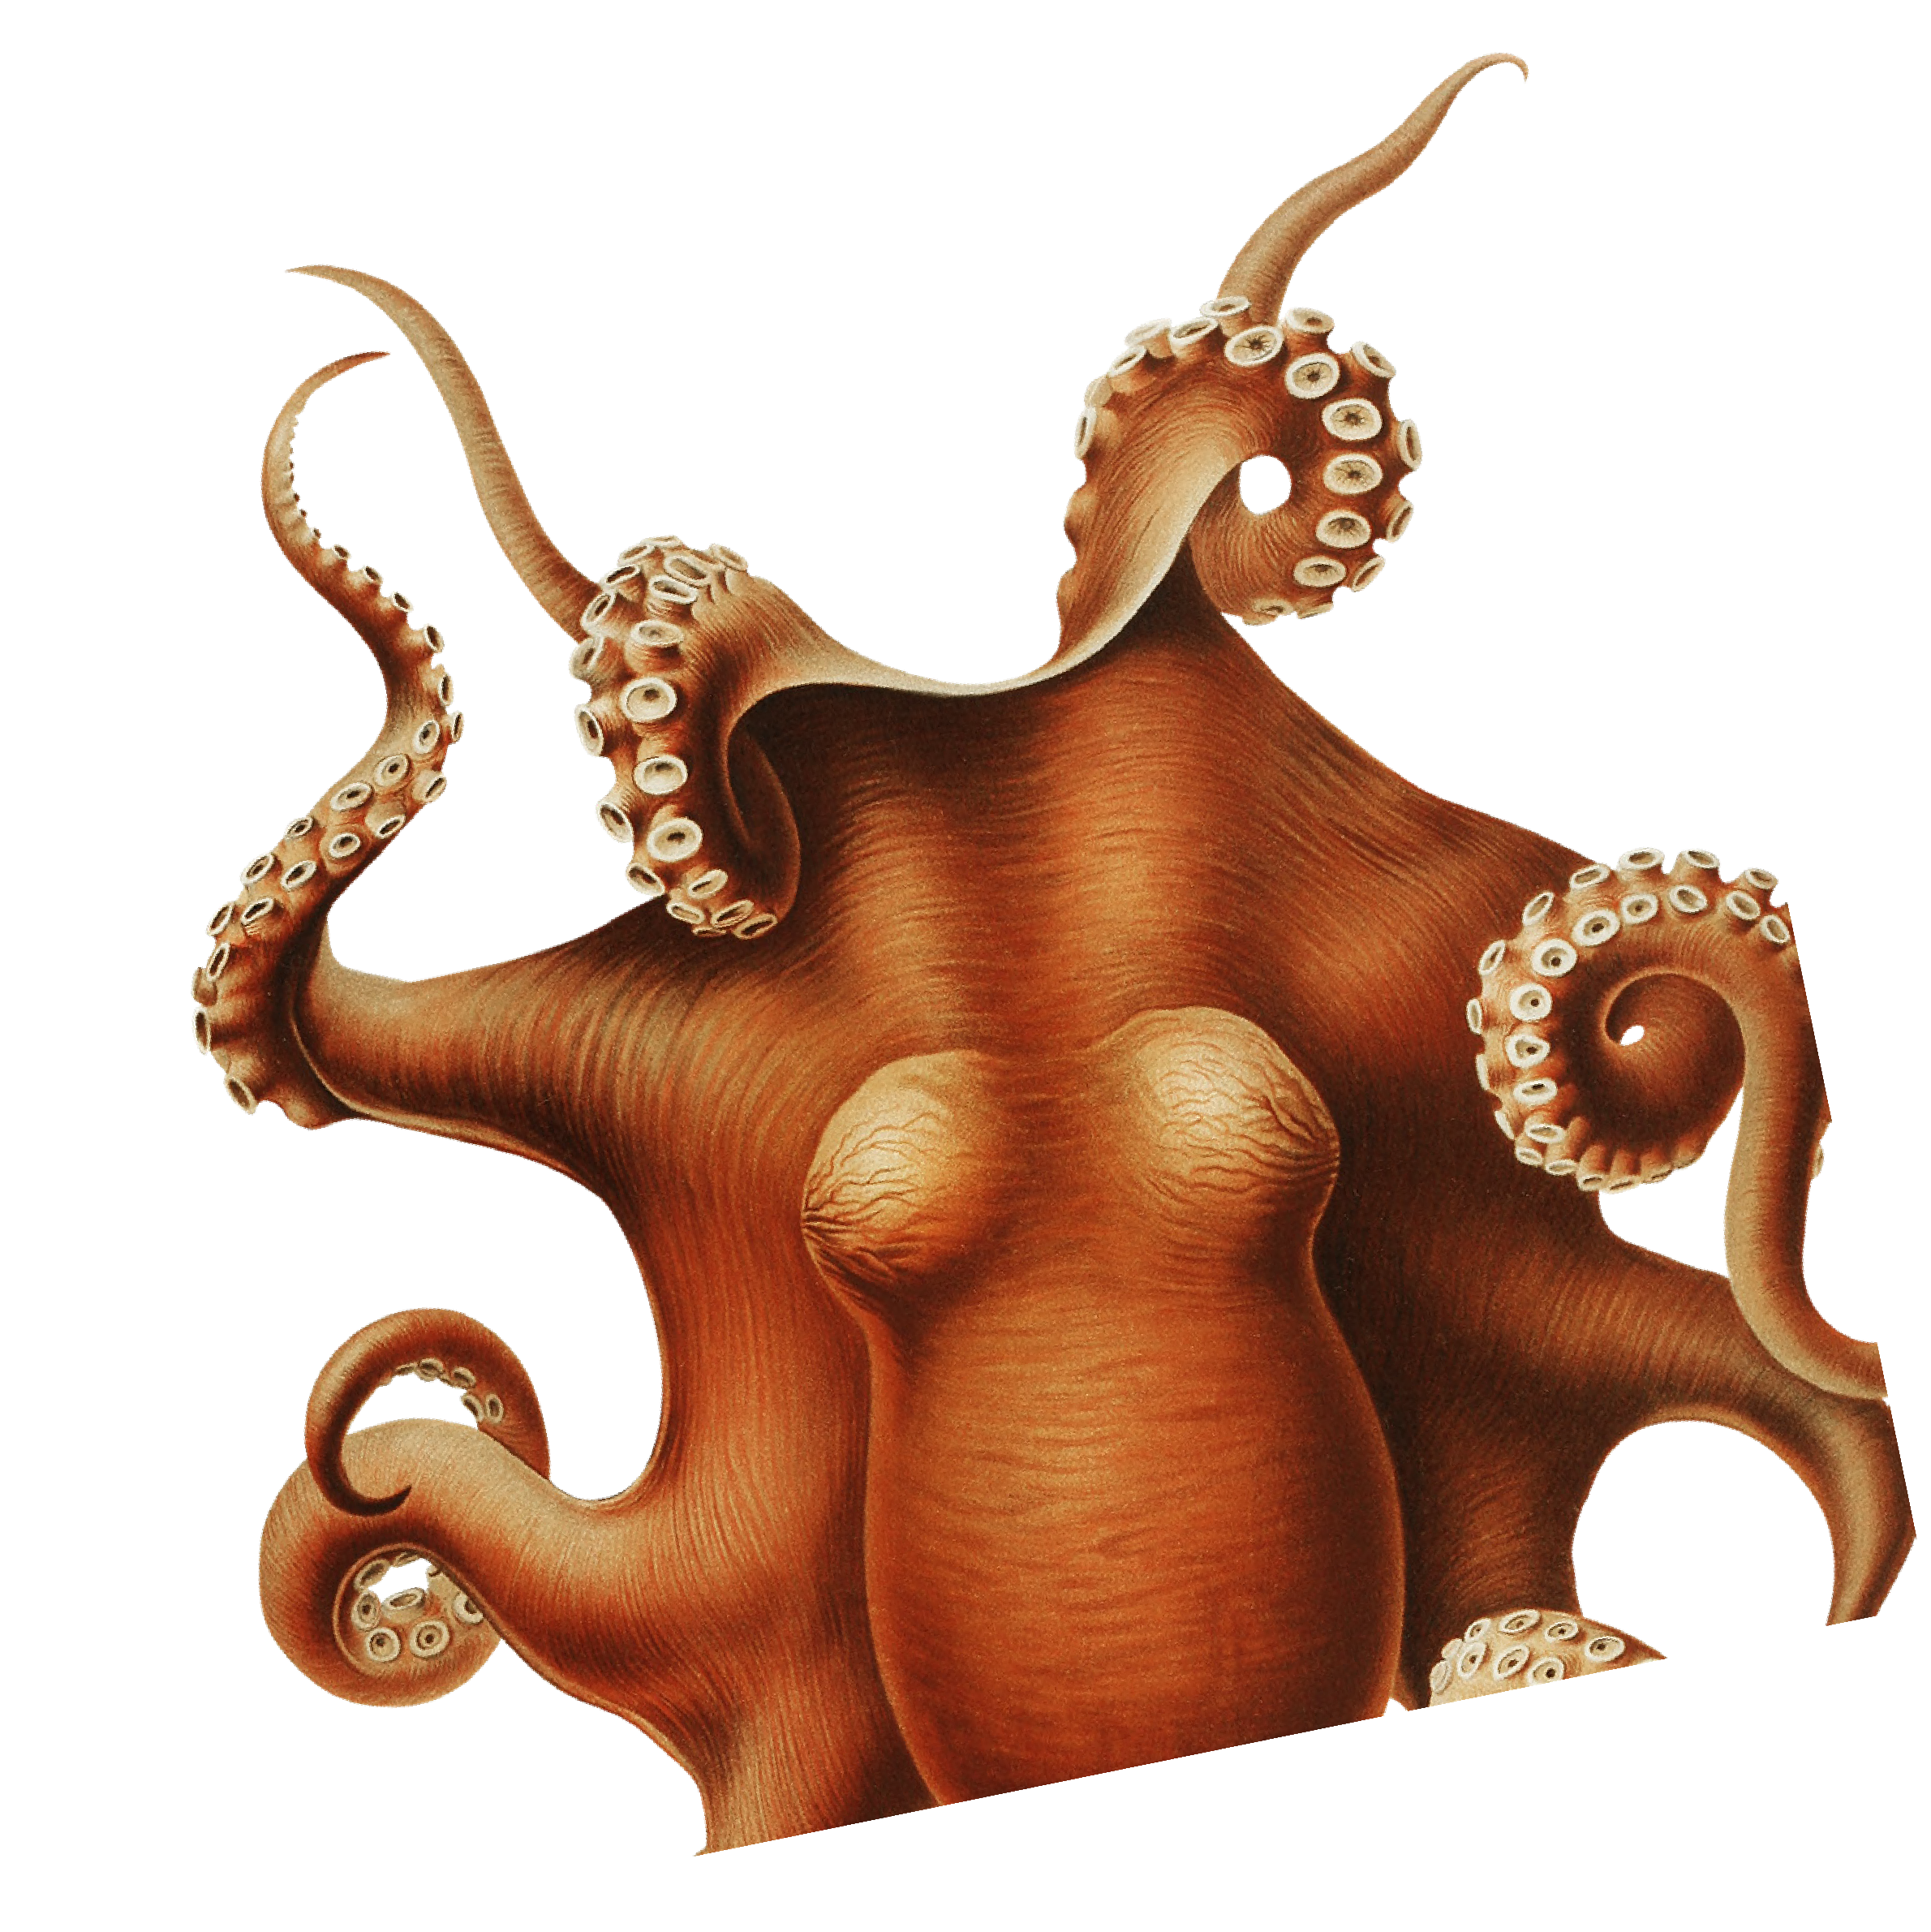 A cutout graphic of an octopus